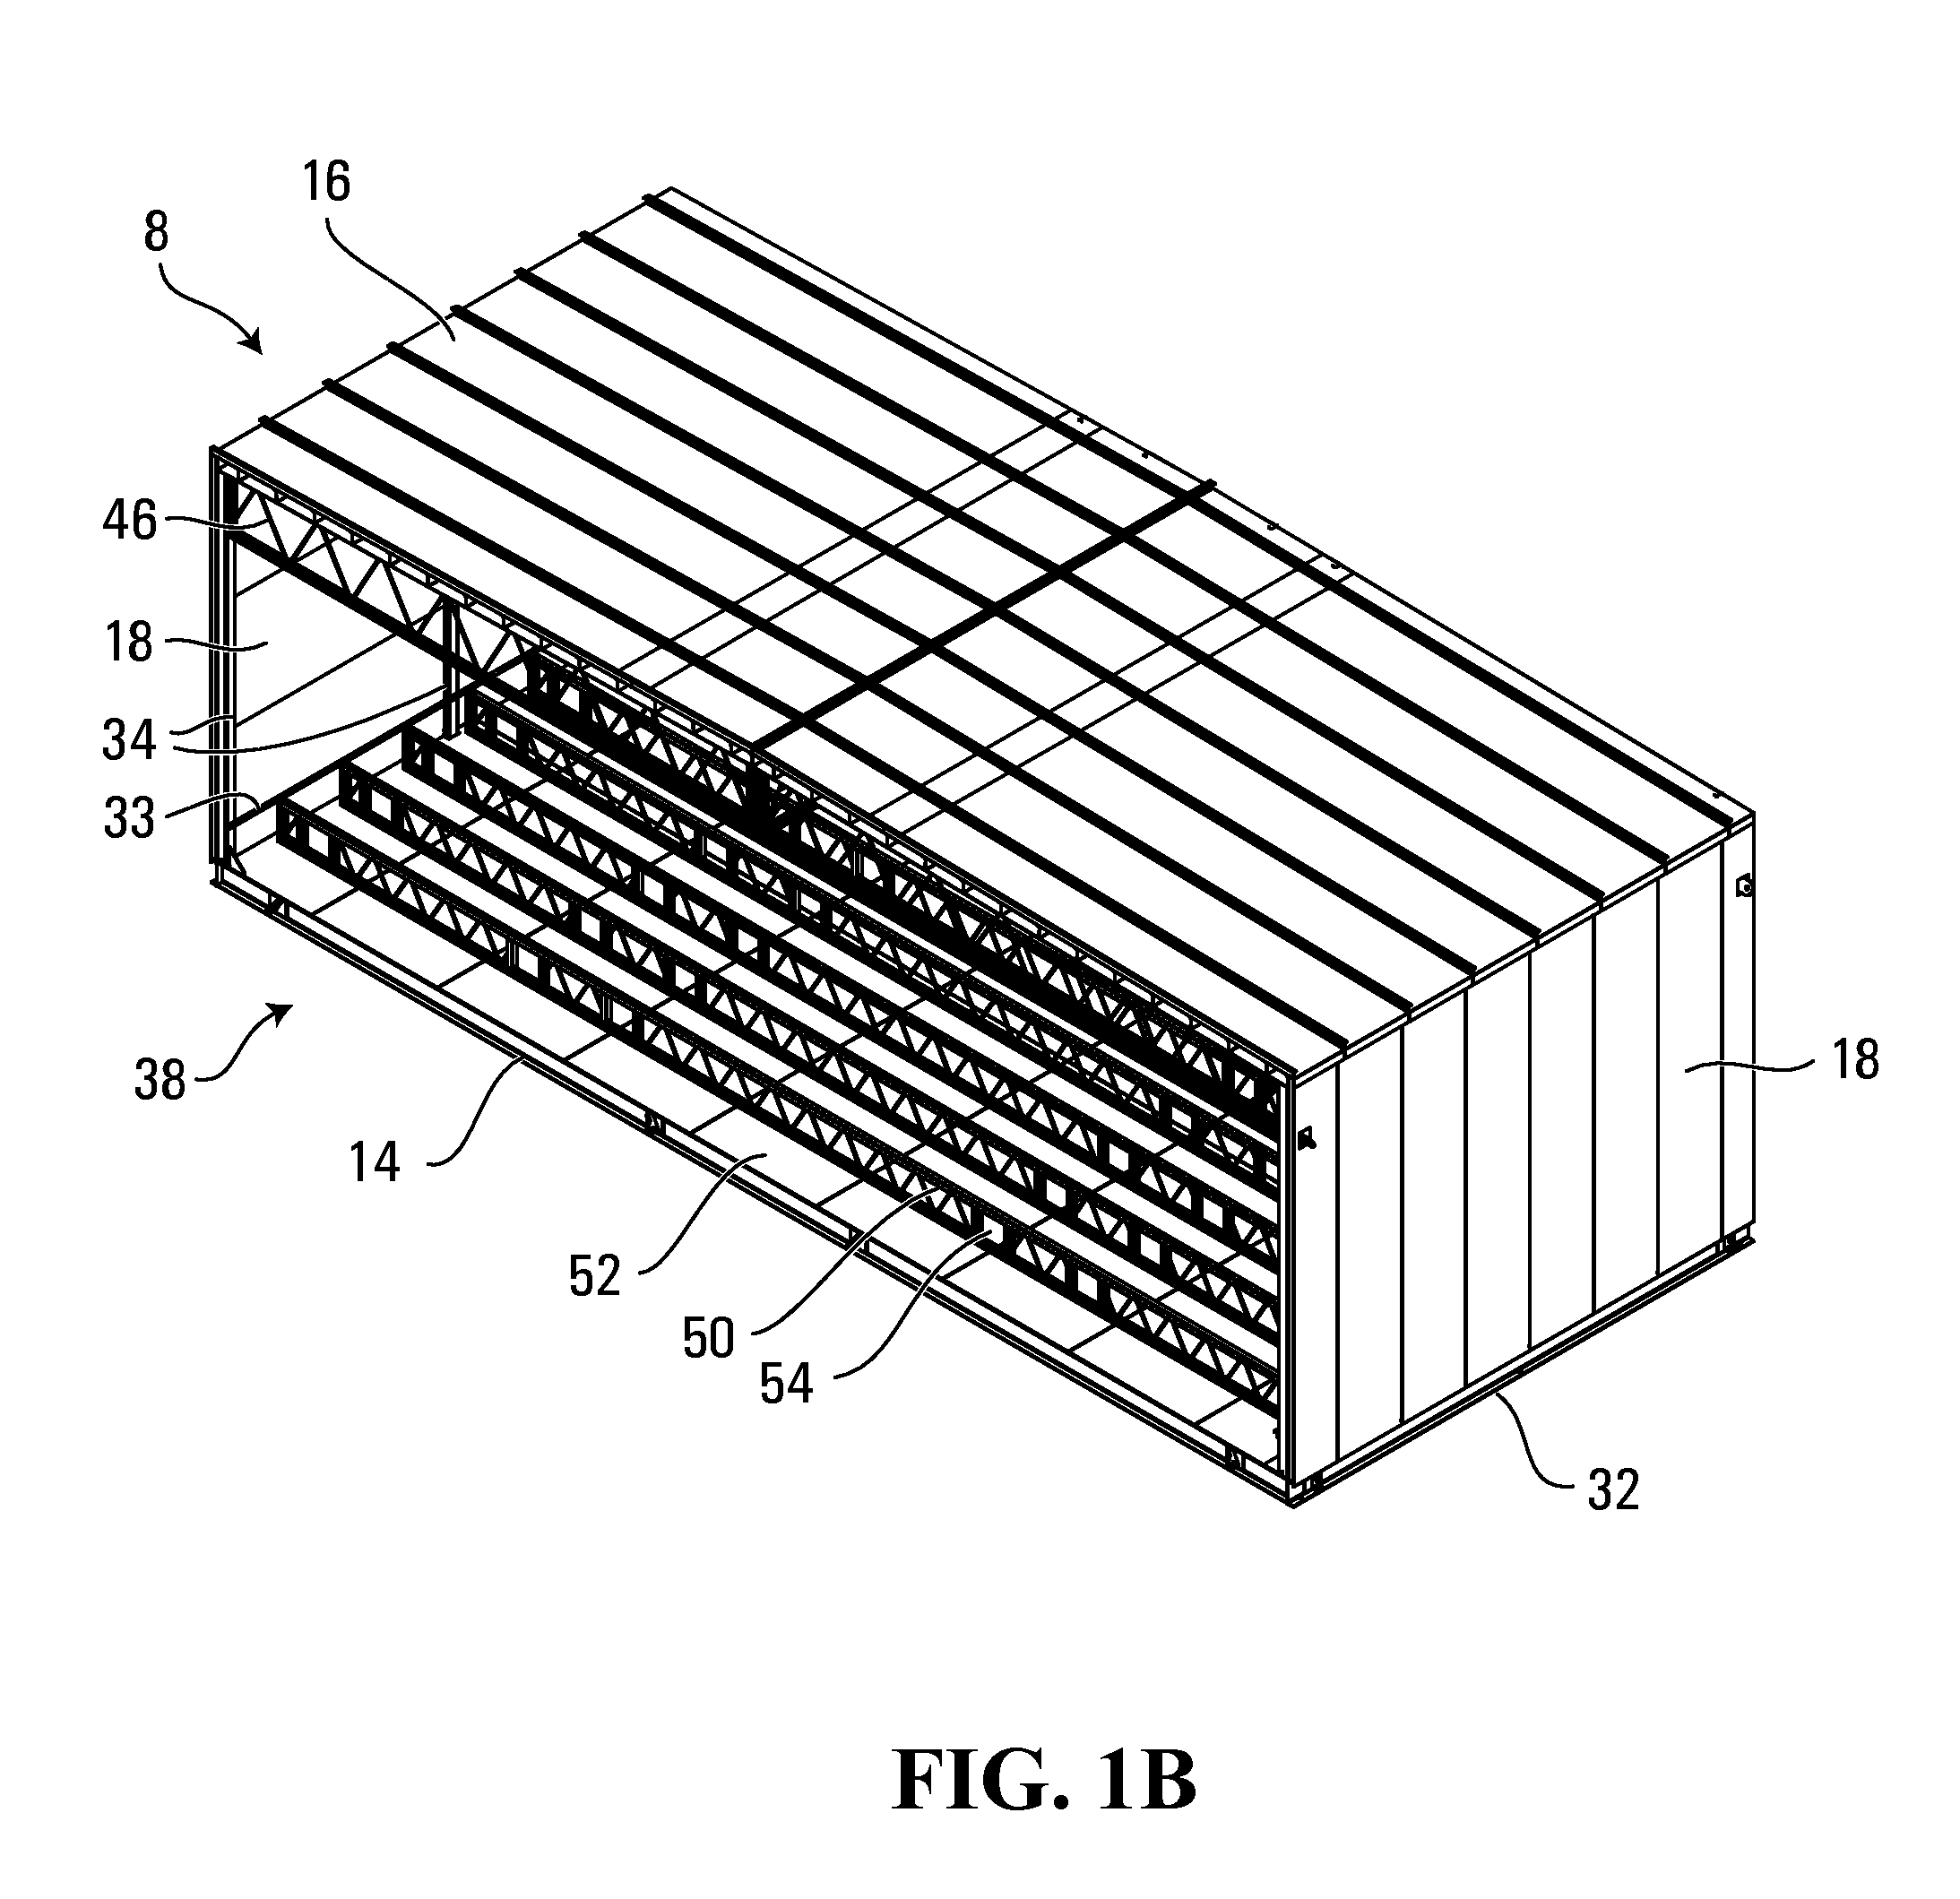 Modular building system and method